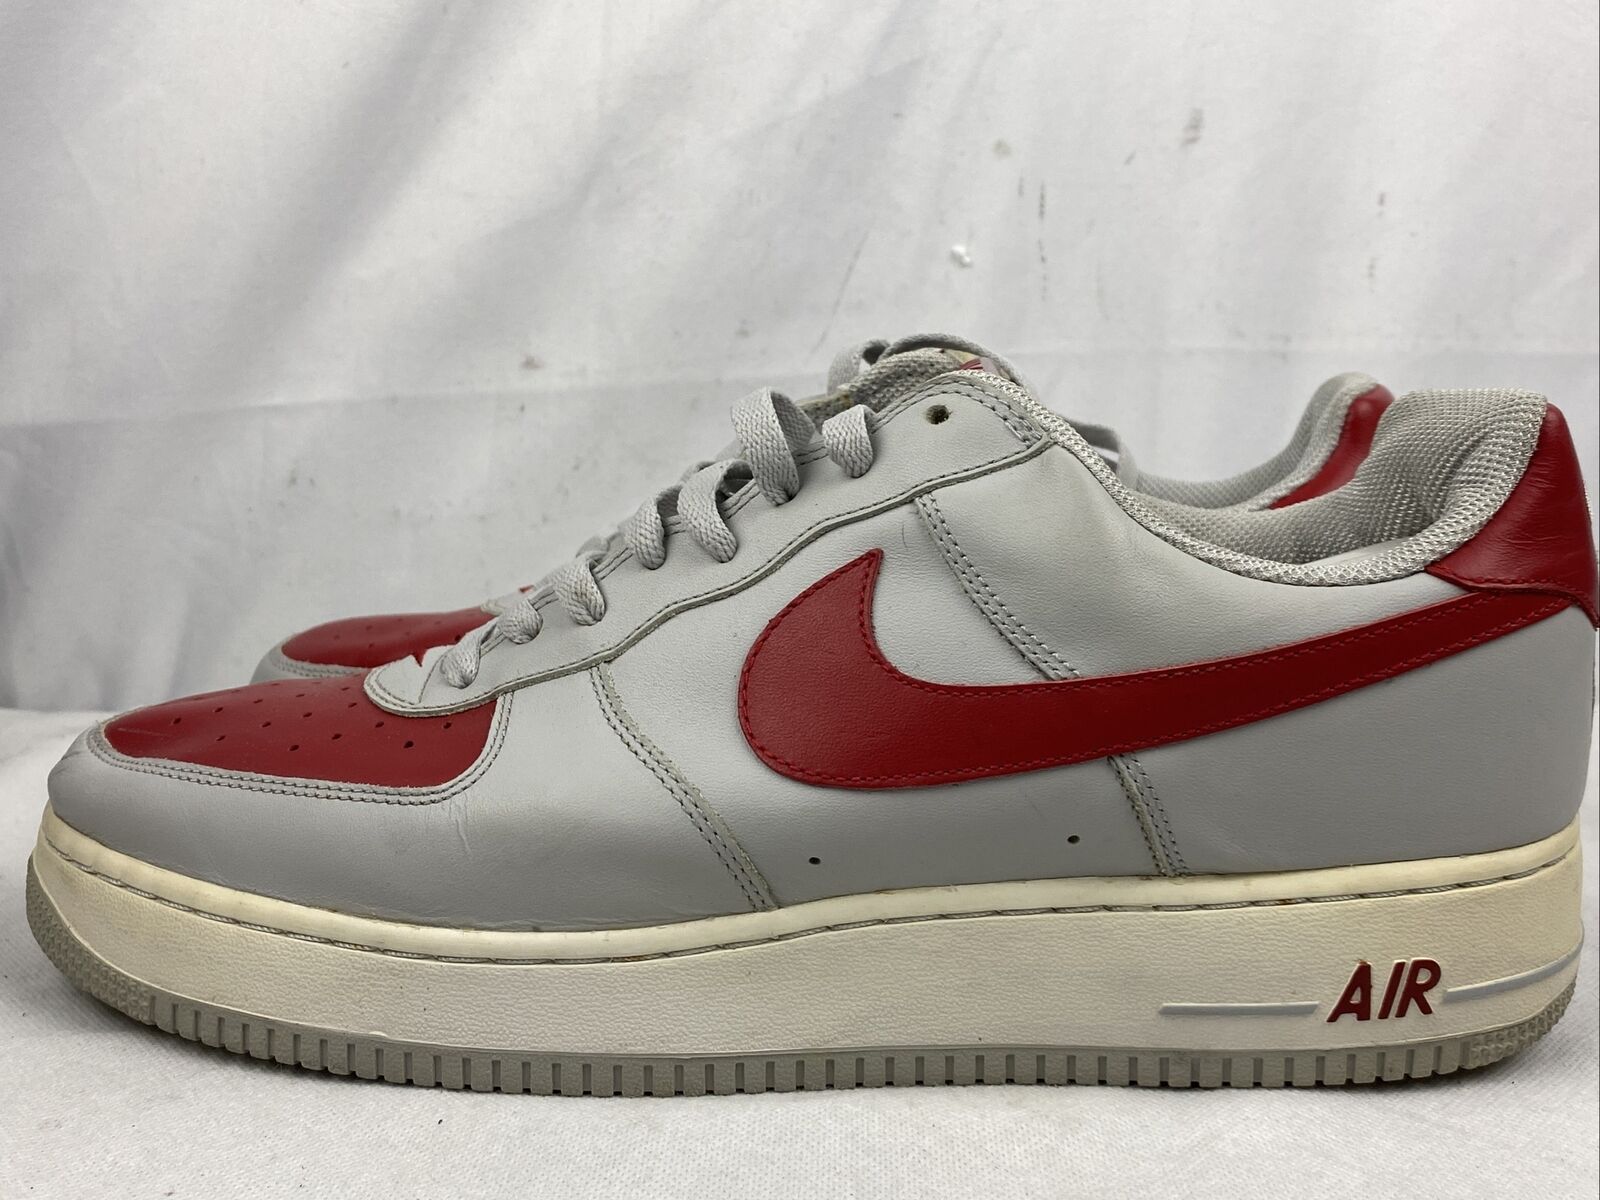 Nike Air Force 1 Gray/Red- 306353-062 Size 14 No Box Retro 2005 Sneakers